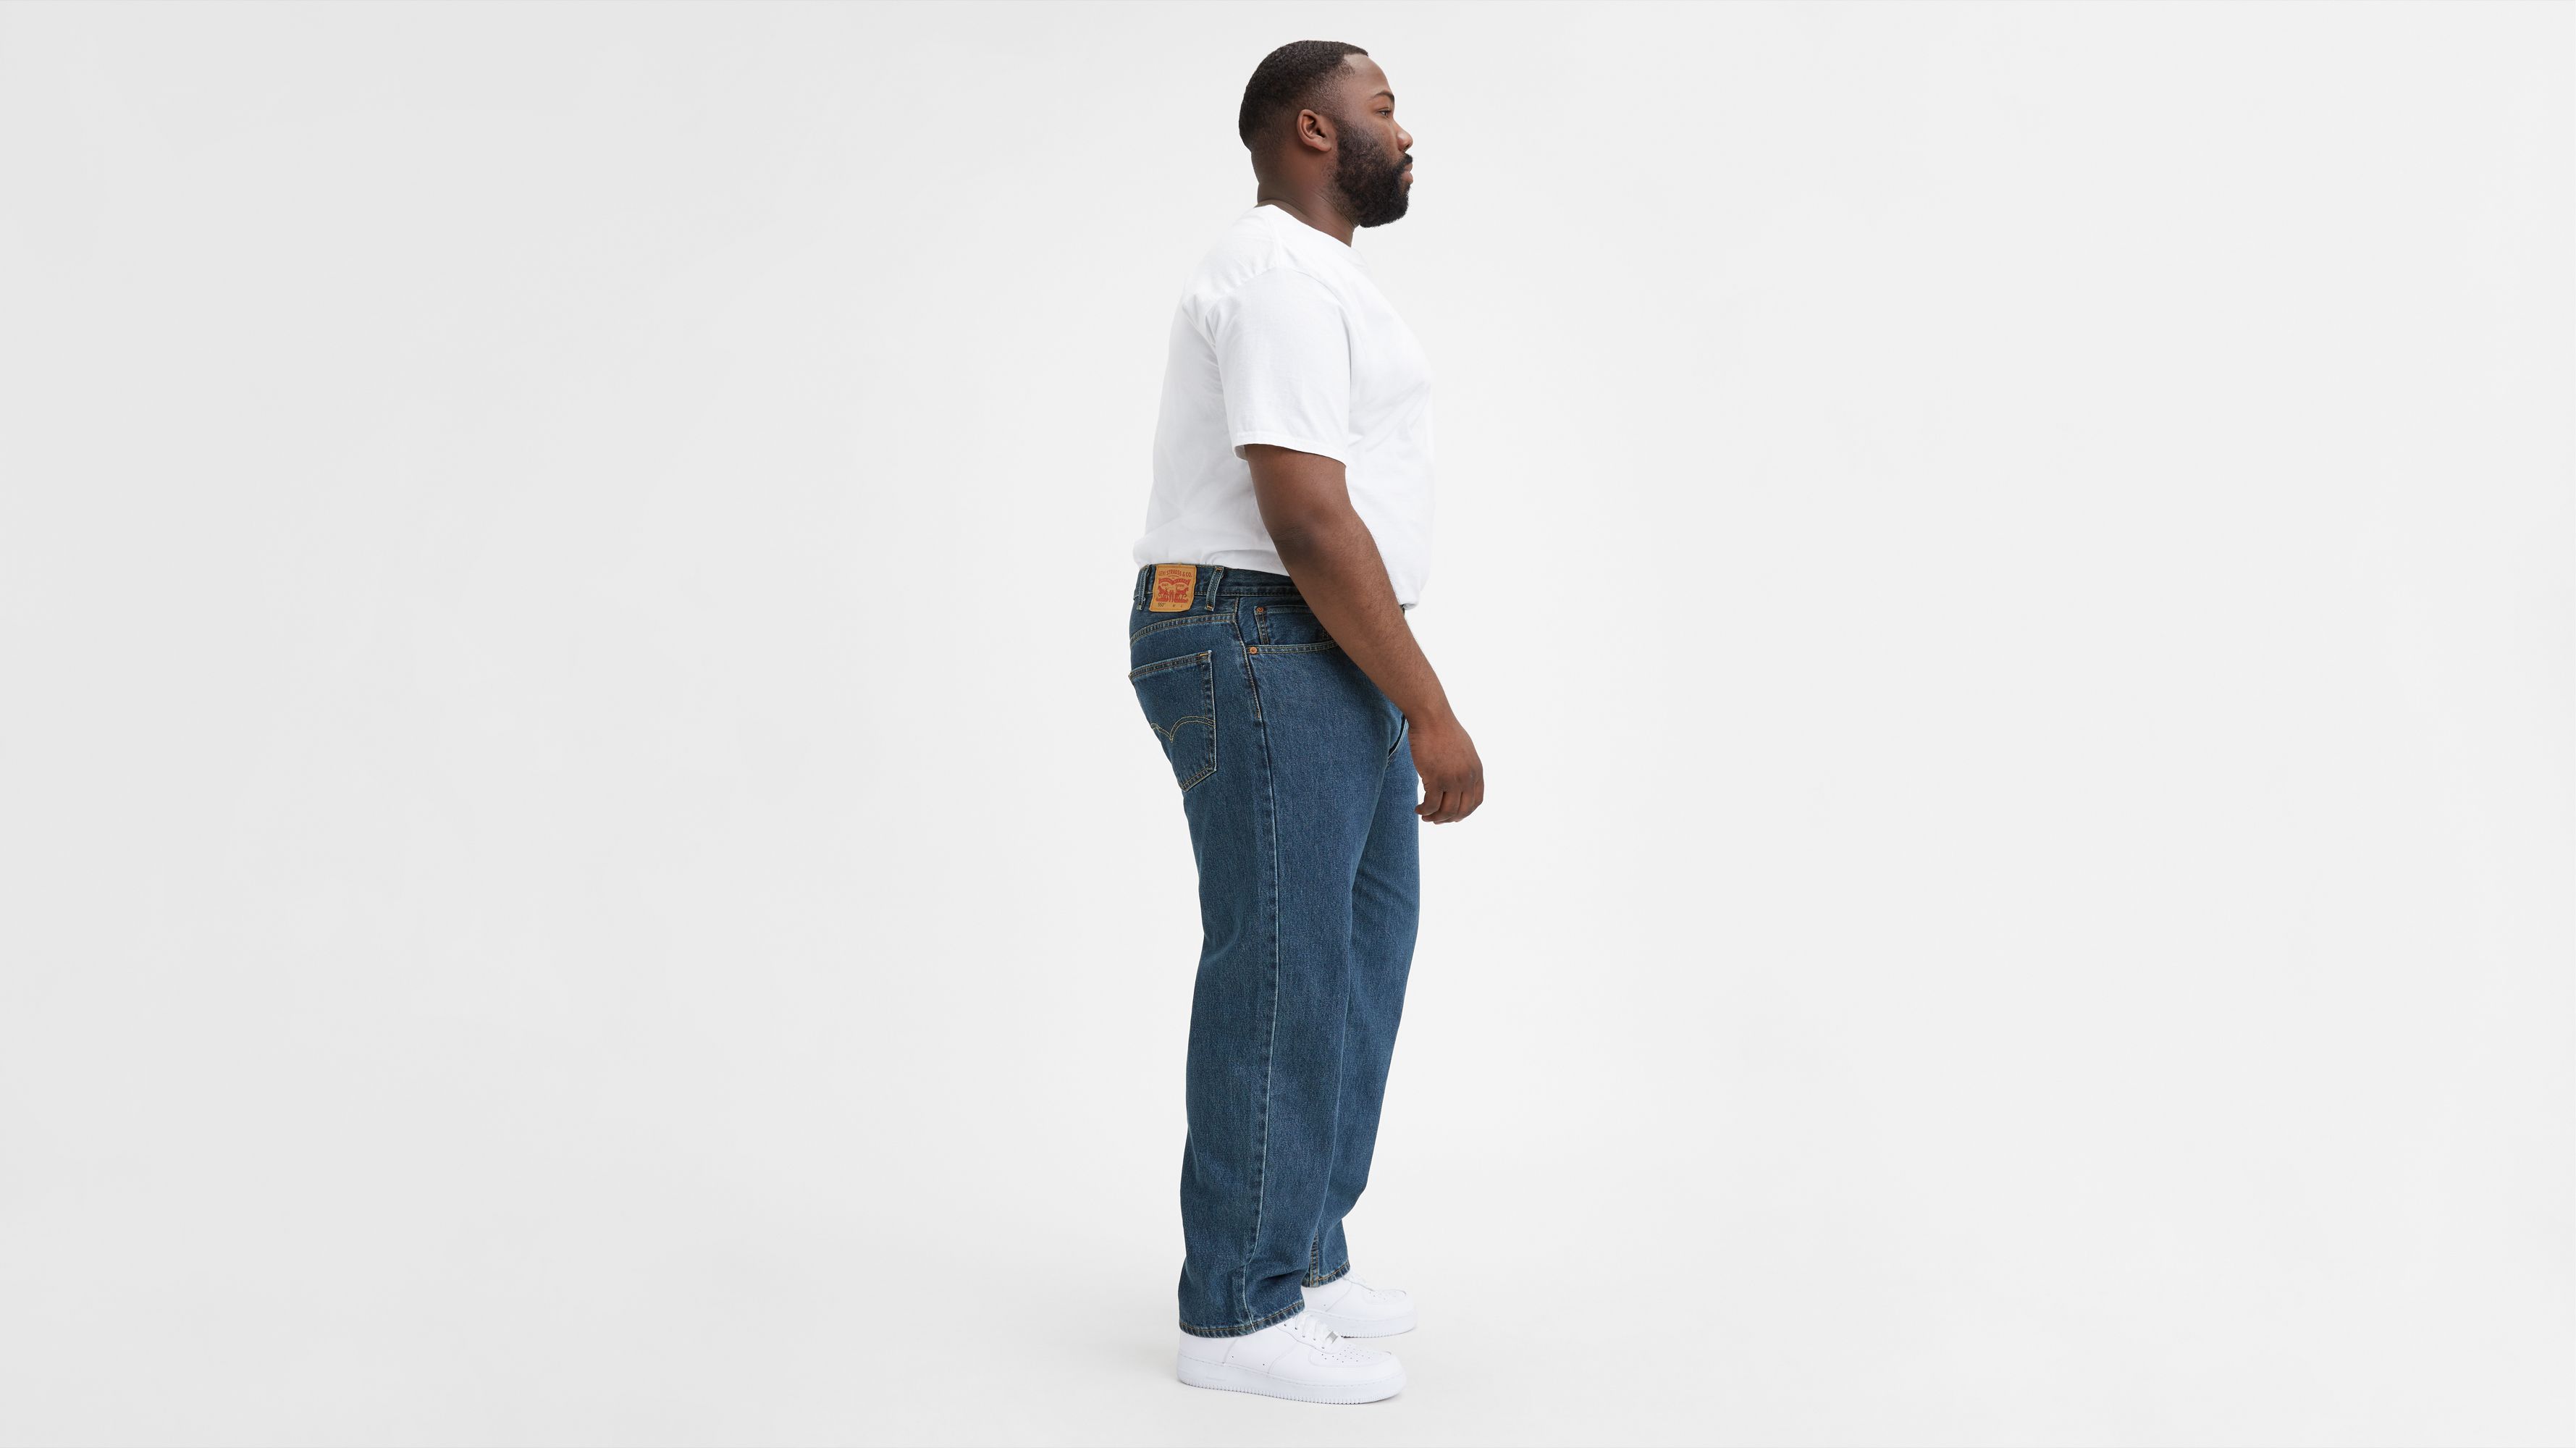 levi's big and tall uk